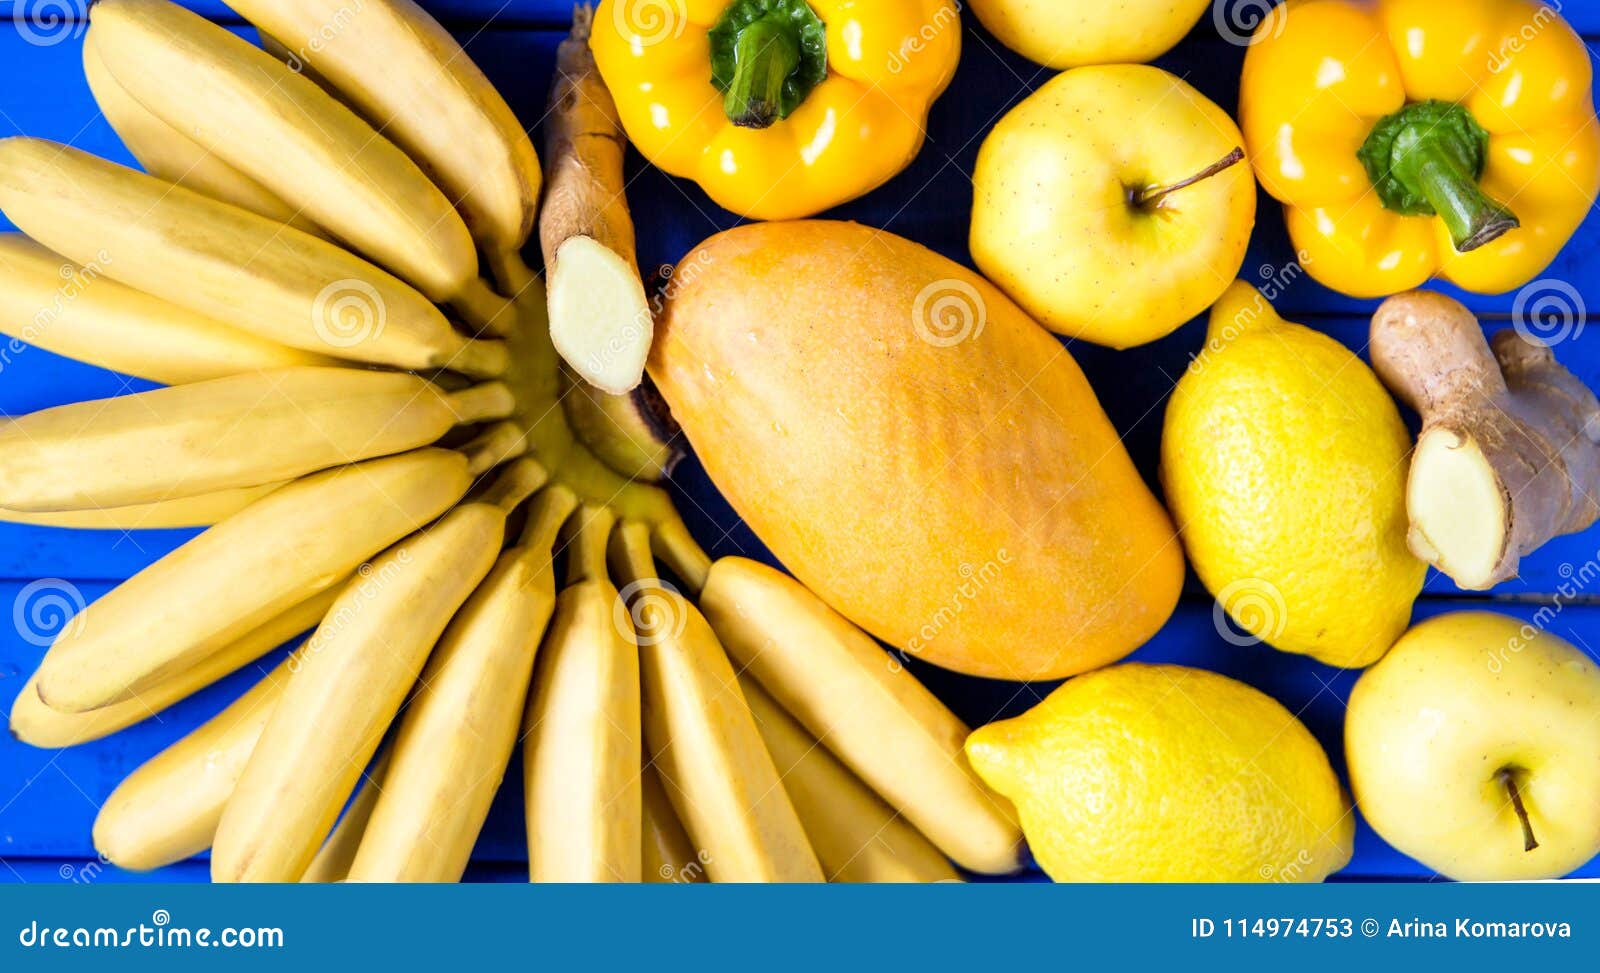 Yellow Fruits And Vegetables Isolated On A Blue Background Stock Image ...